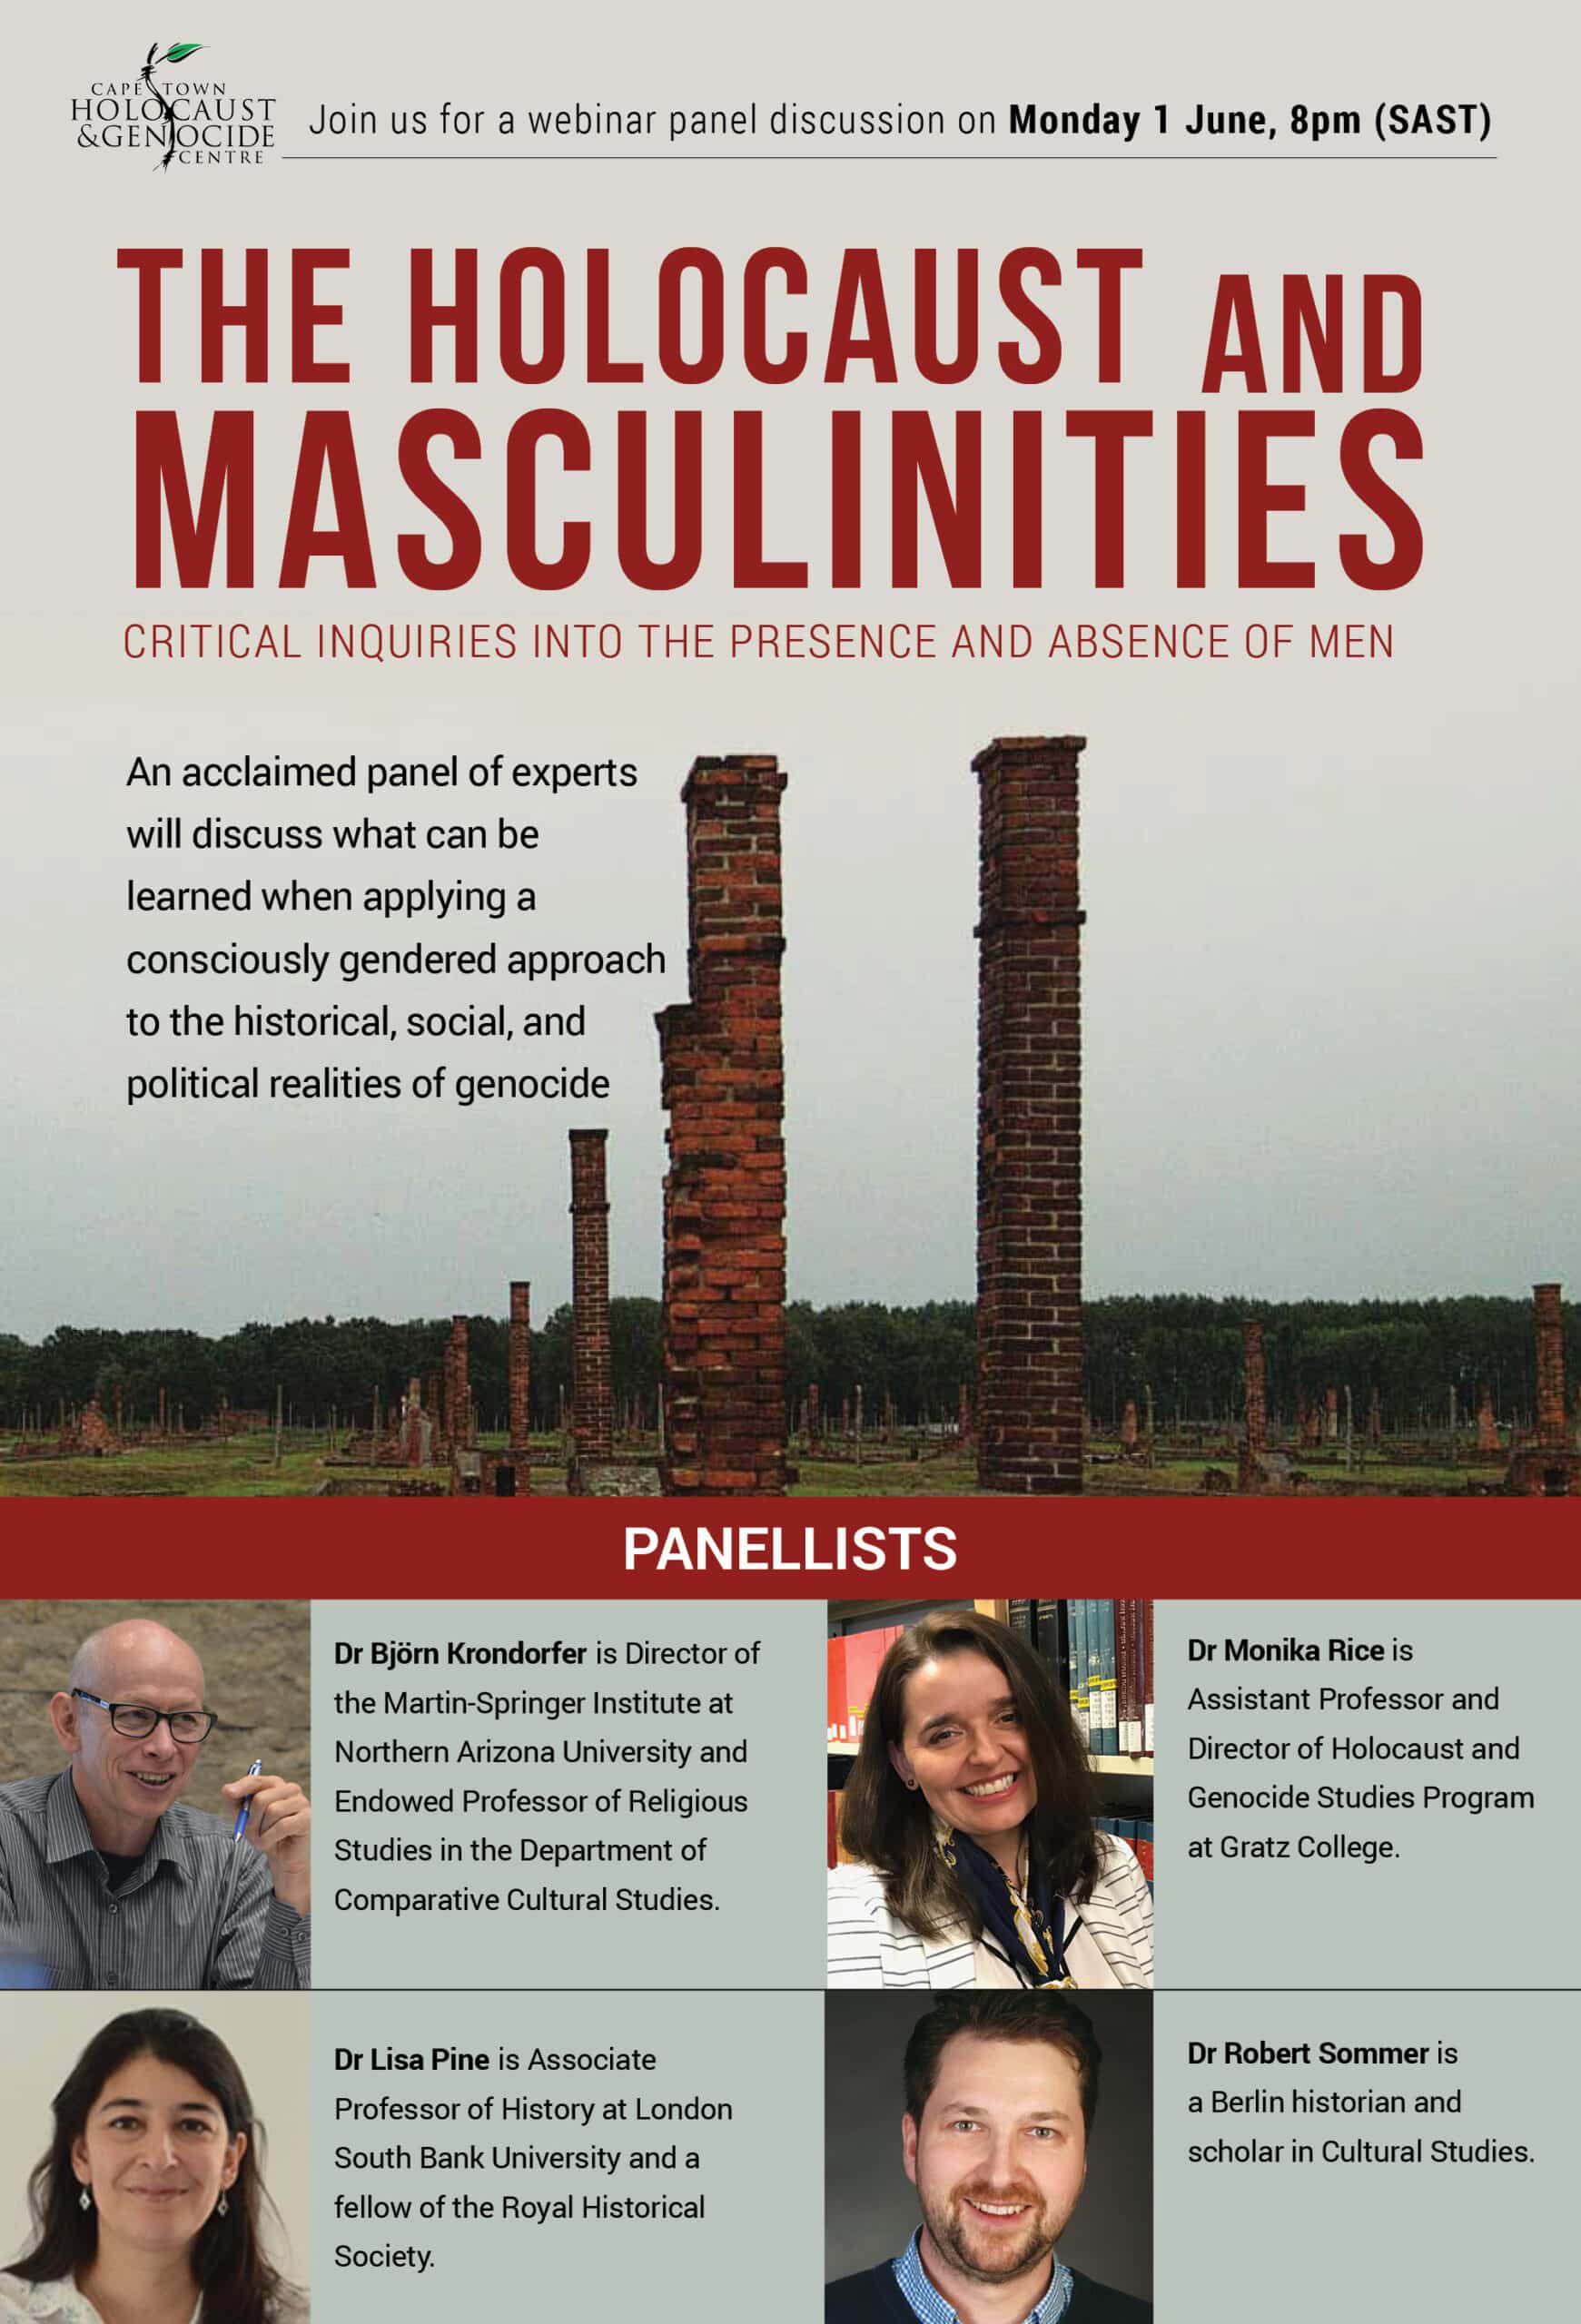 Holocaust and Masculinities panel discussion SAST